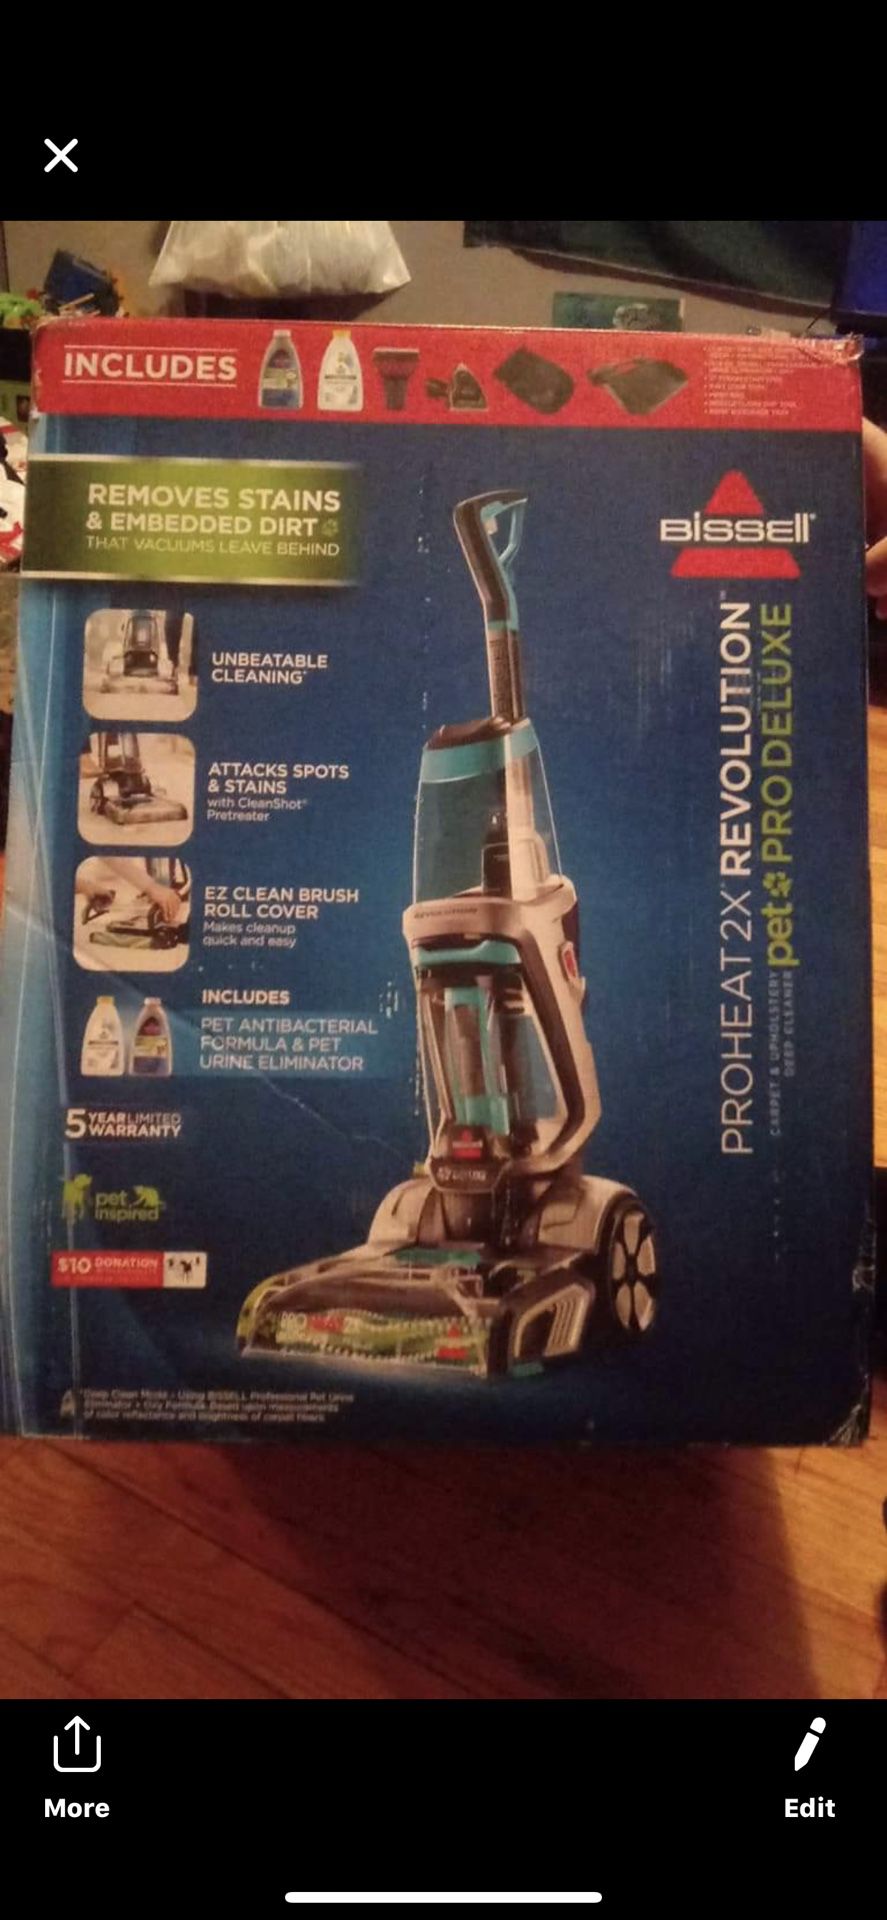 Bissell Brand new never used Bissell PROHEAT 2X Revolution Pet Pro.